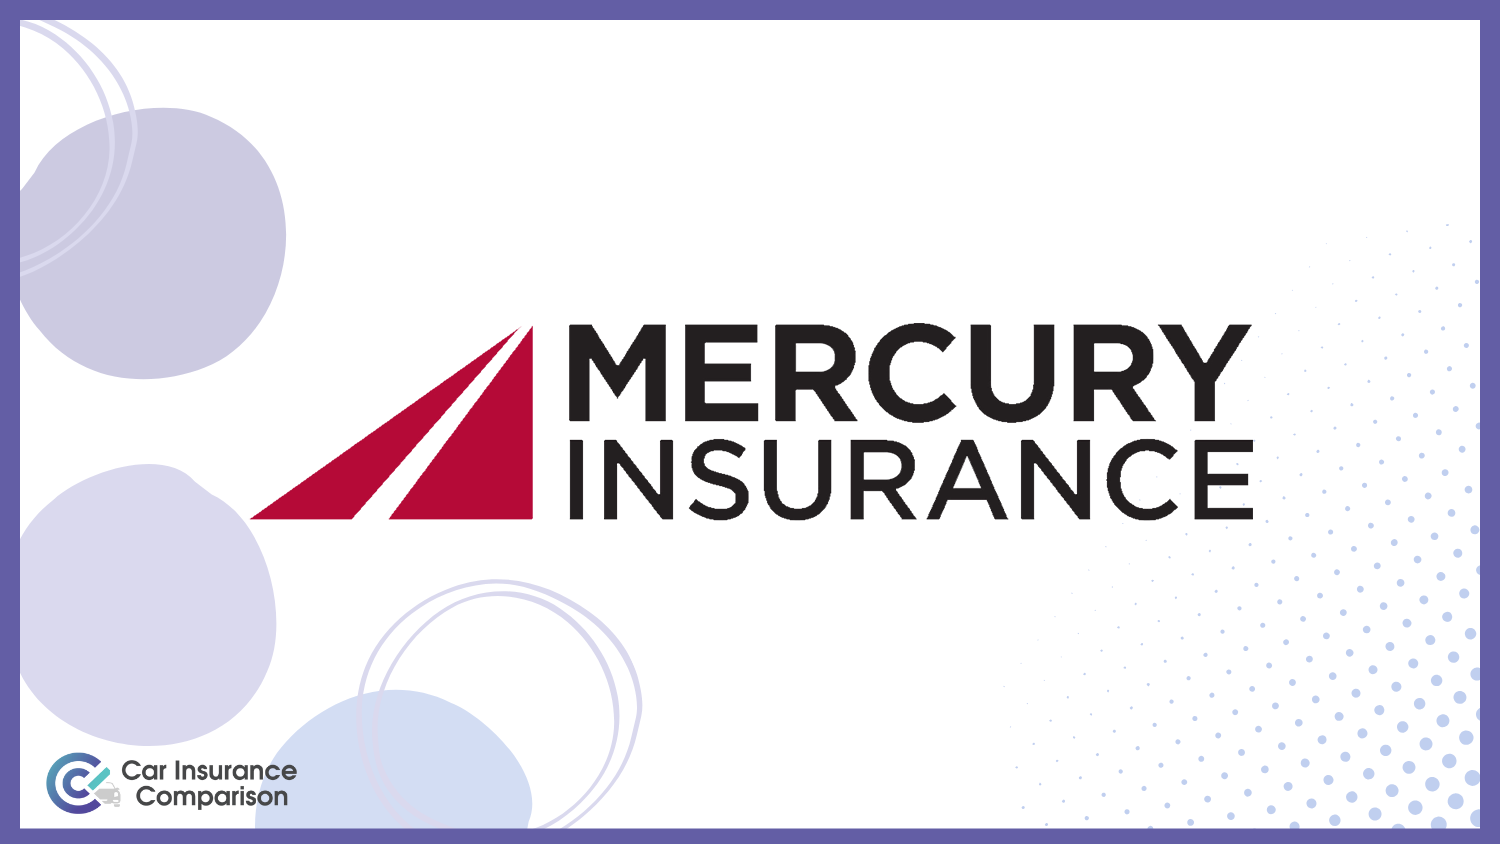 Mercury: Best Car Insurance Companies That Only Look Back 3 Years